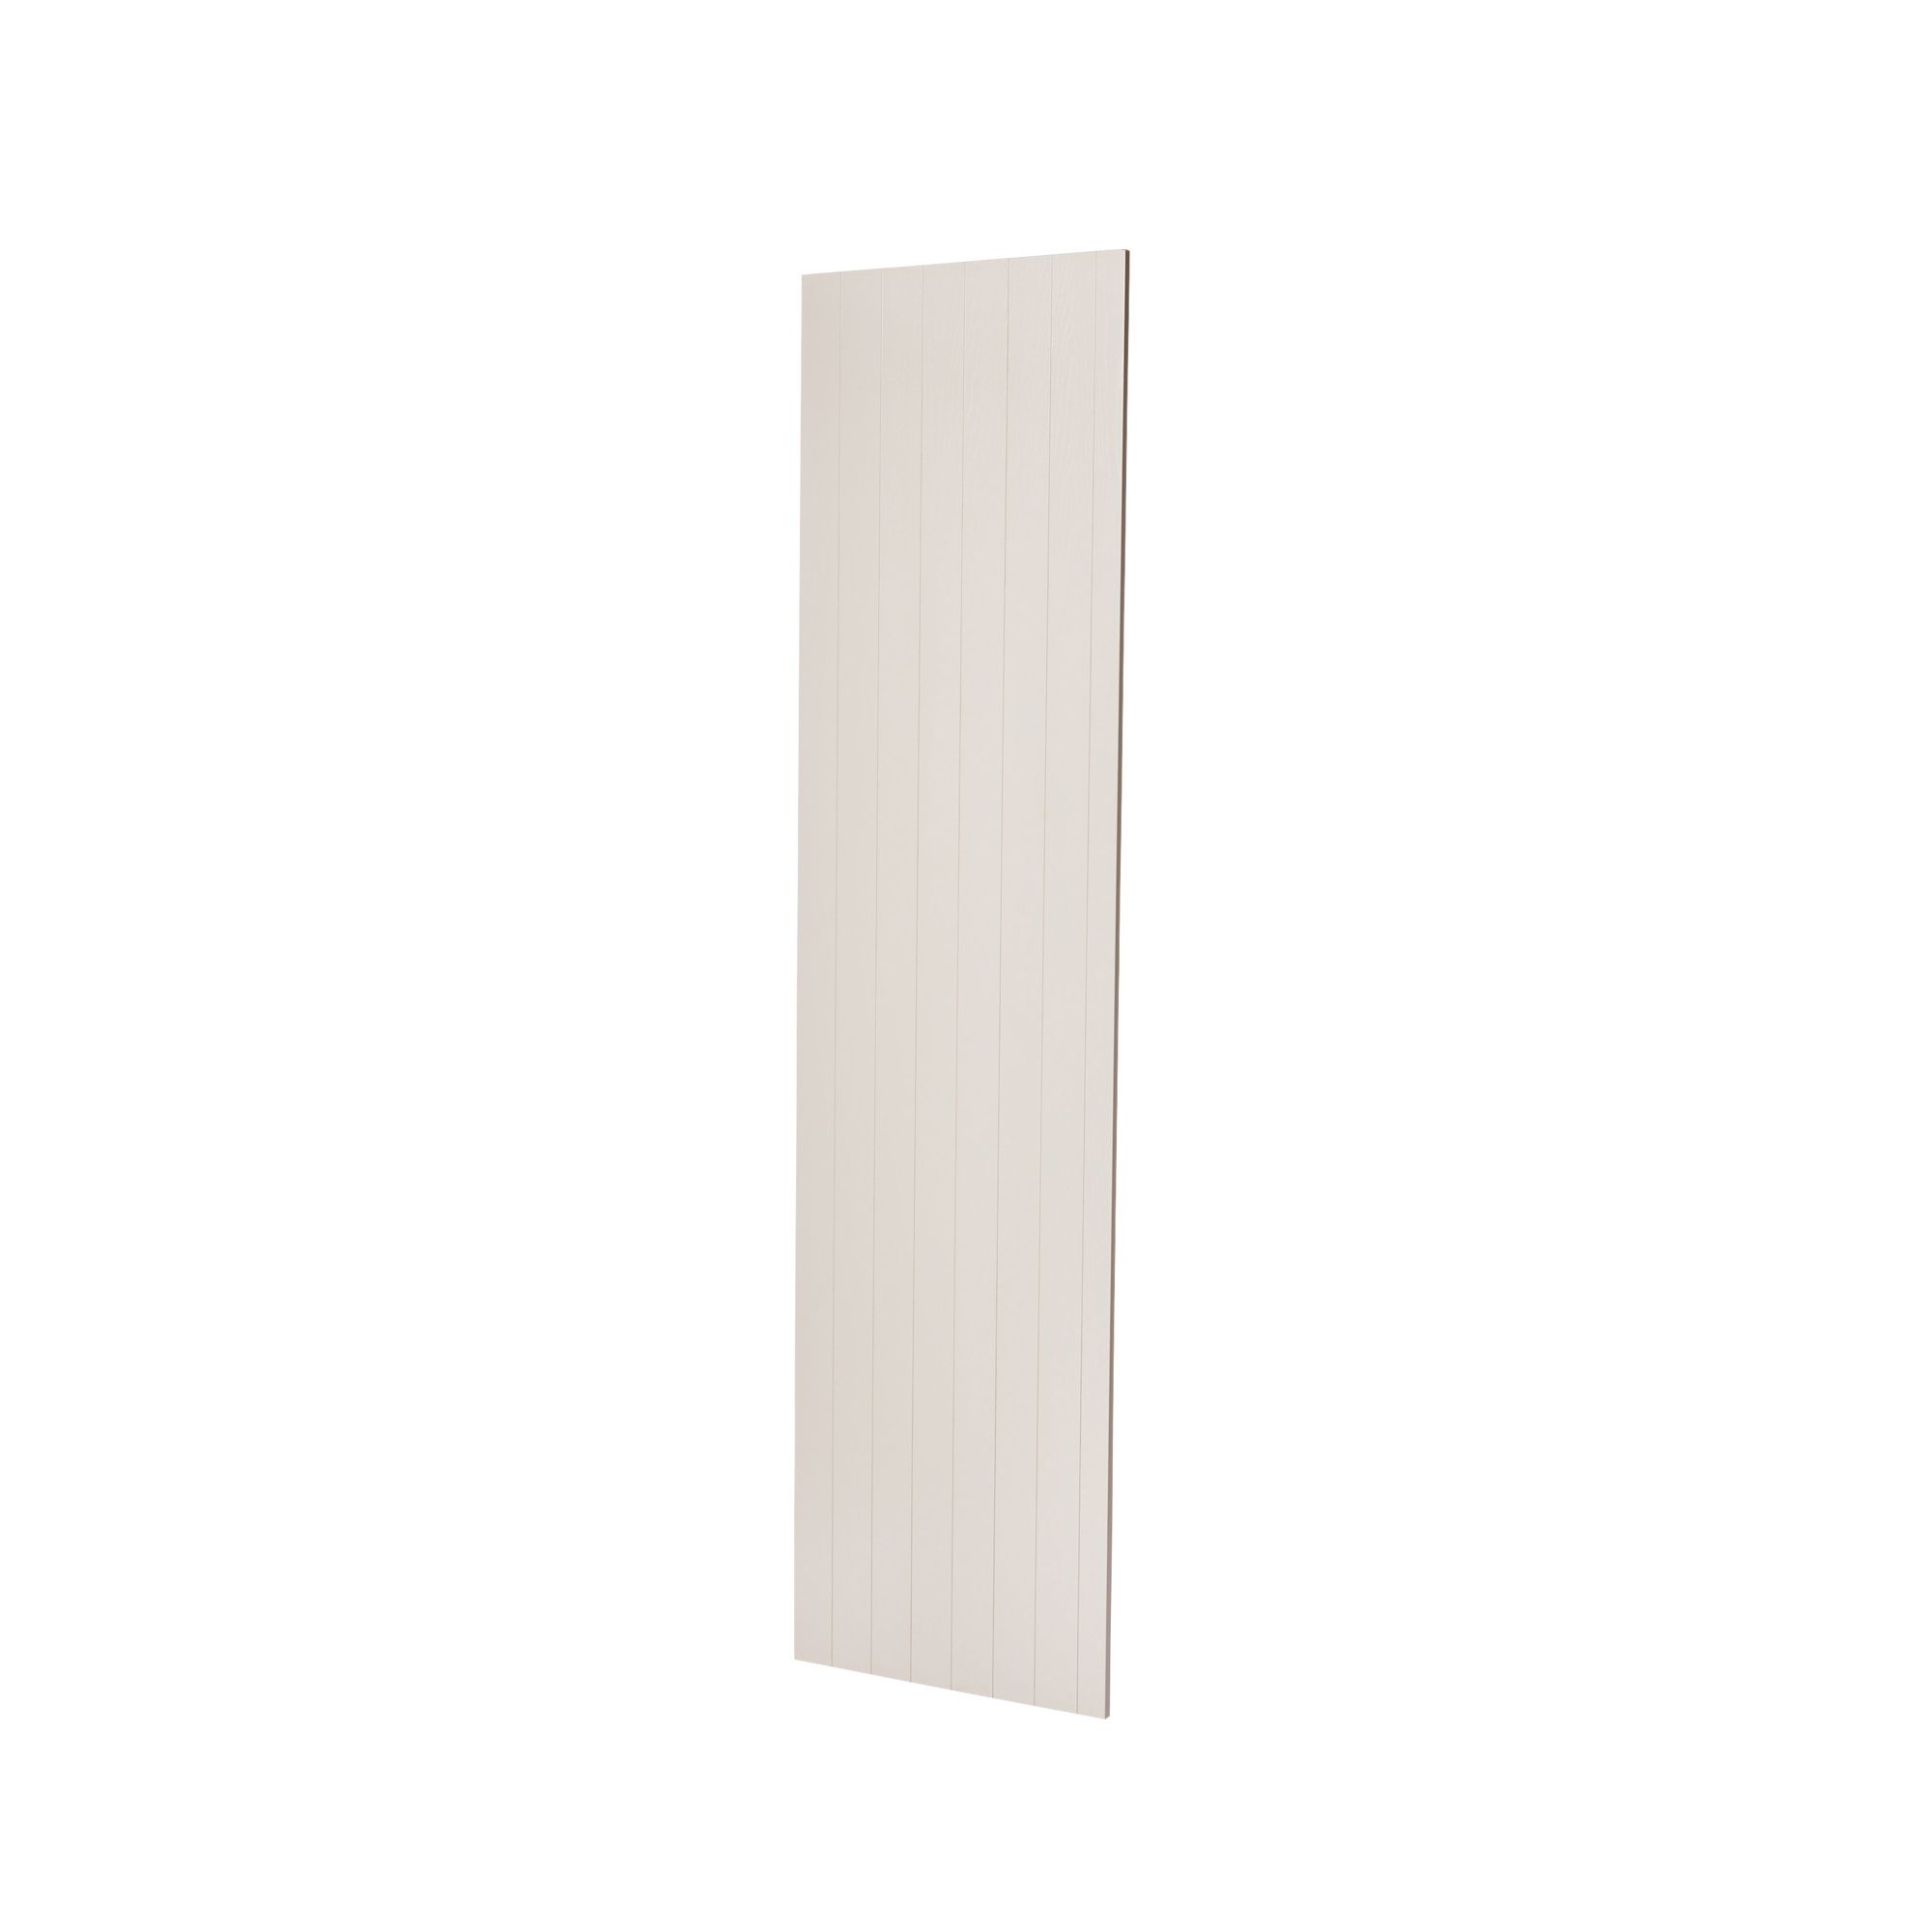 GoodHome Verbena Cashmere painted natural ash shaker Tall Appliance & larder End panel (H)2400mm (W)610mm